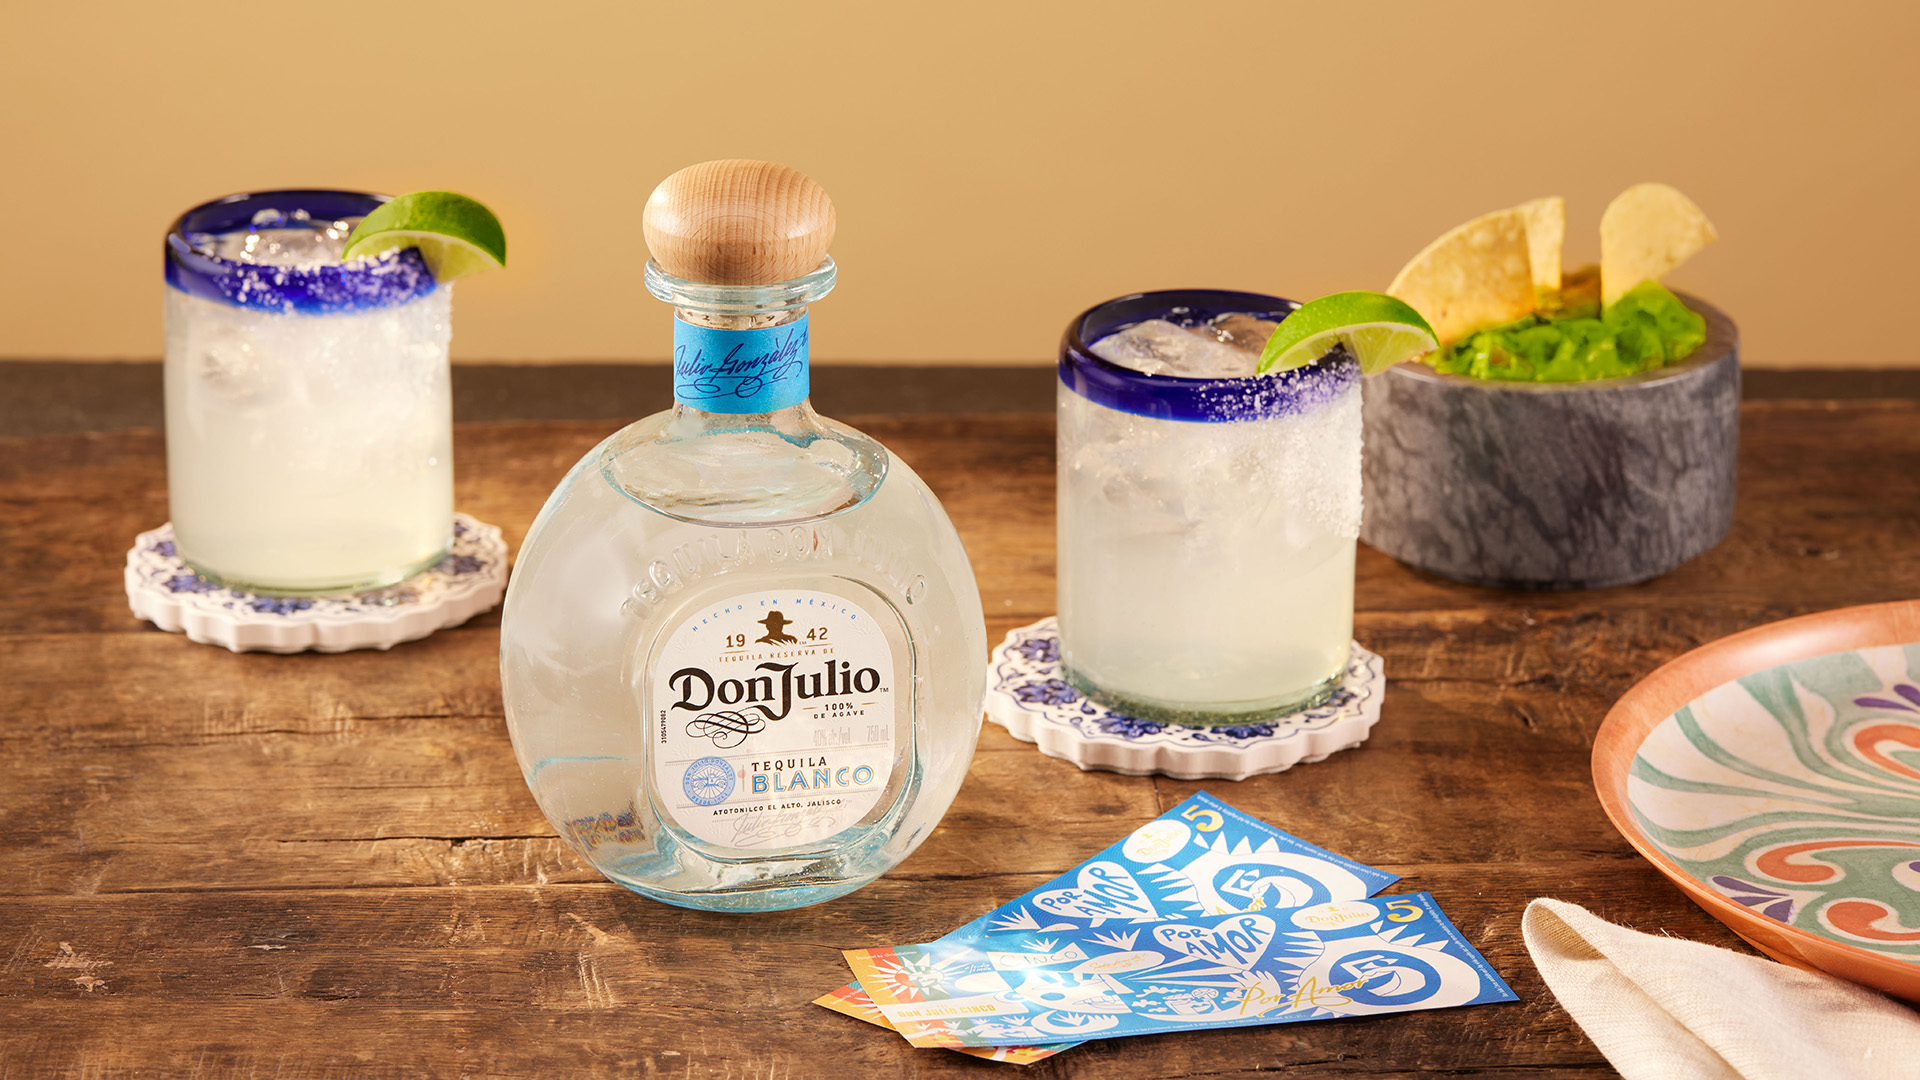 Follow @donjuliotequila from May 1-7 to know when Don Julio Cincos will be available to be won each day!